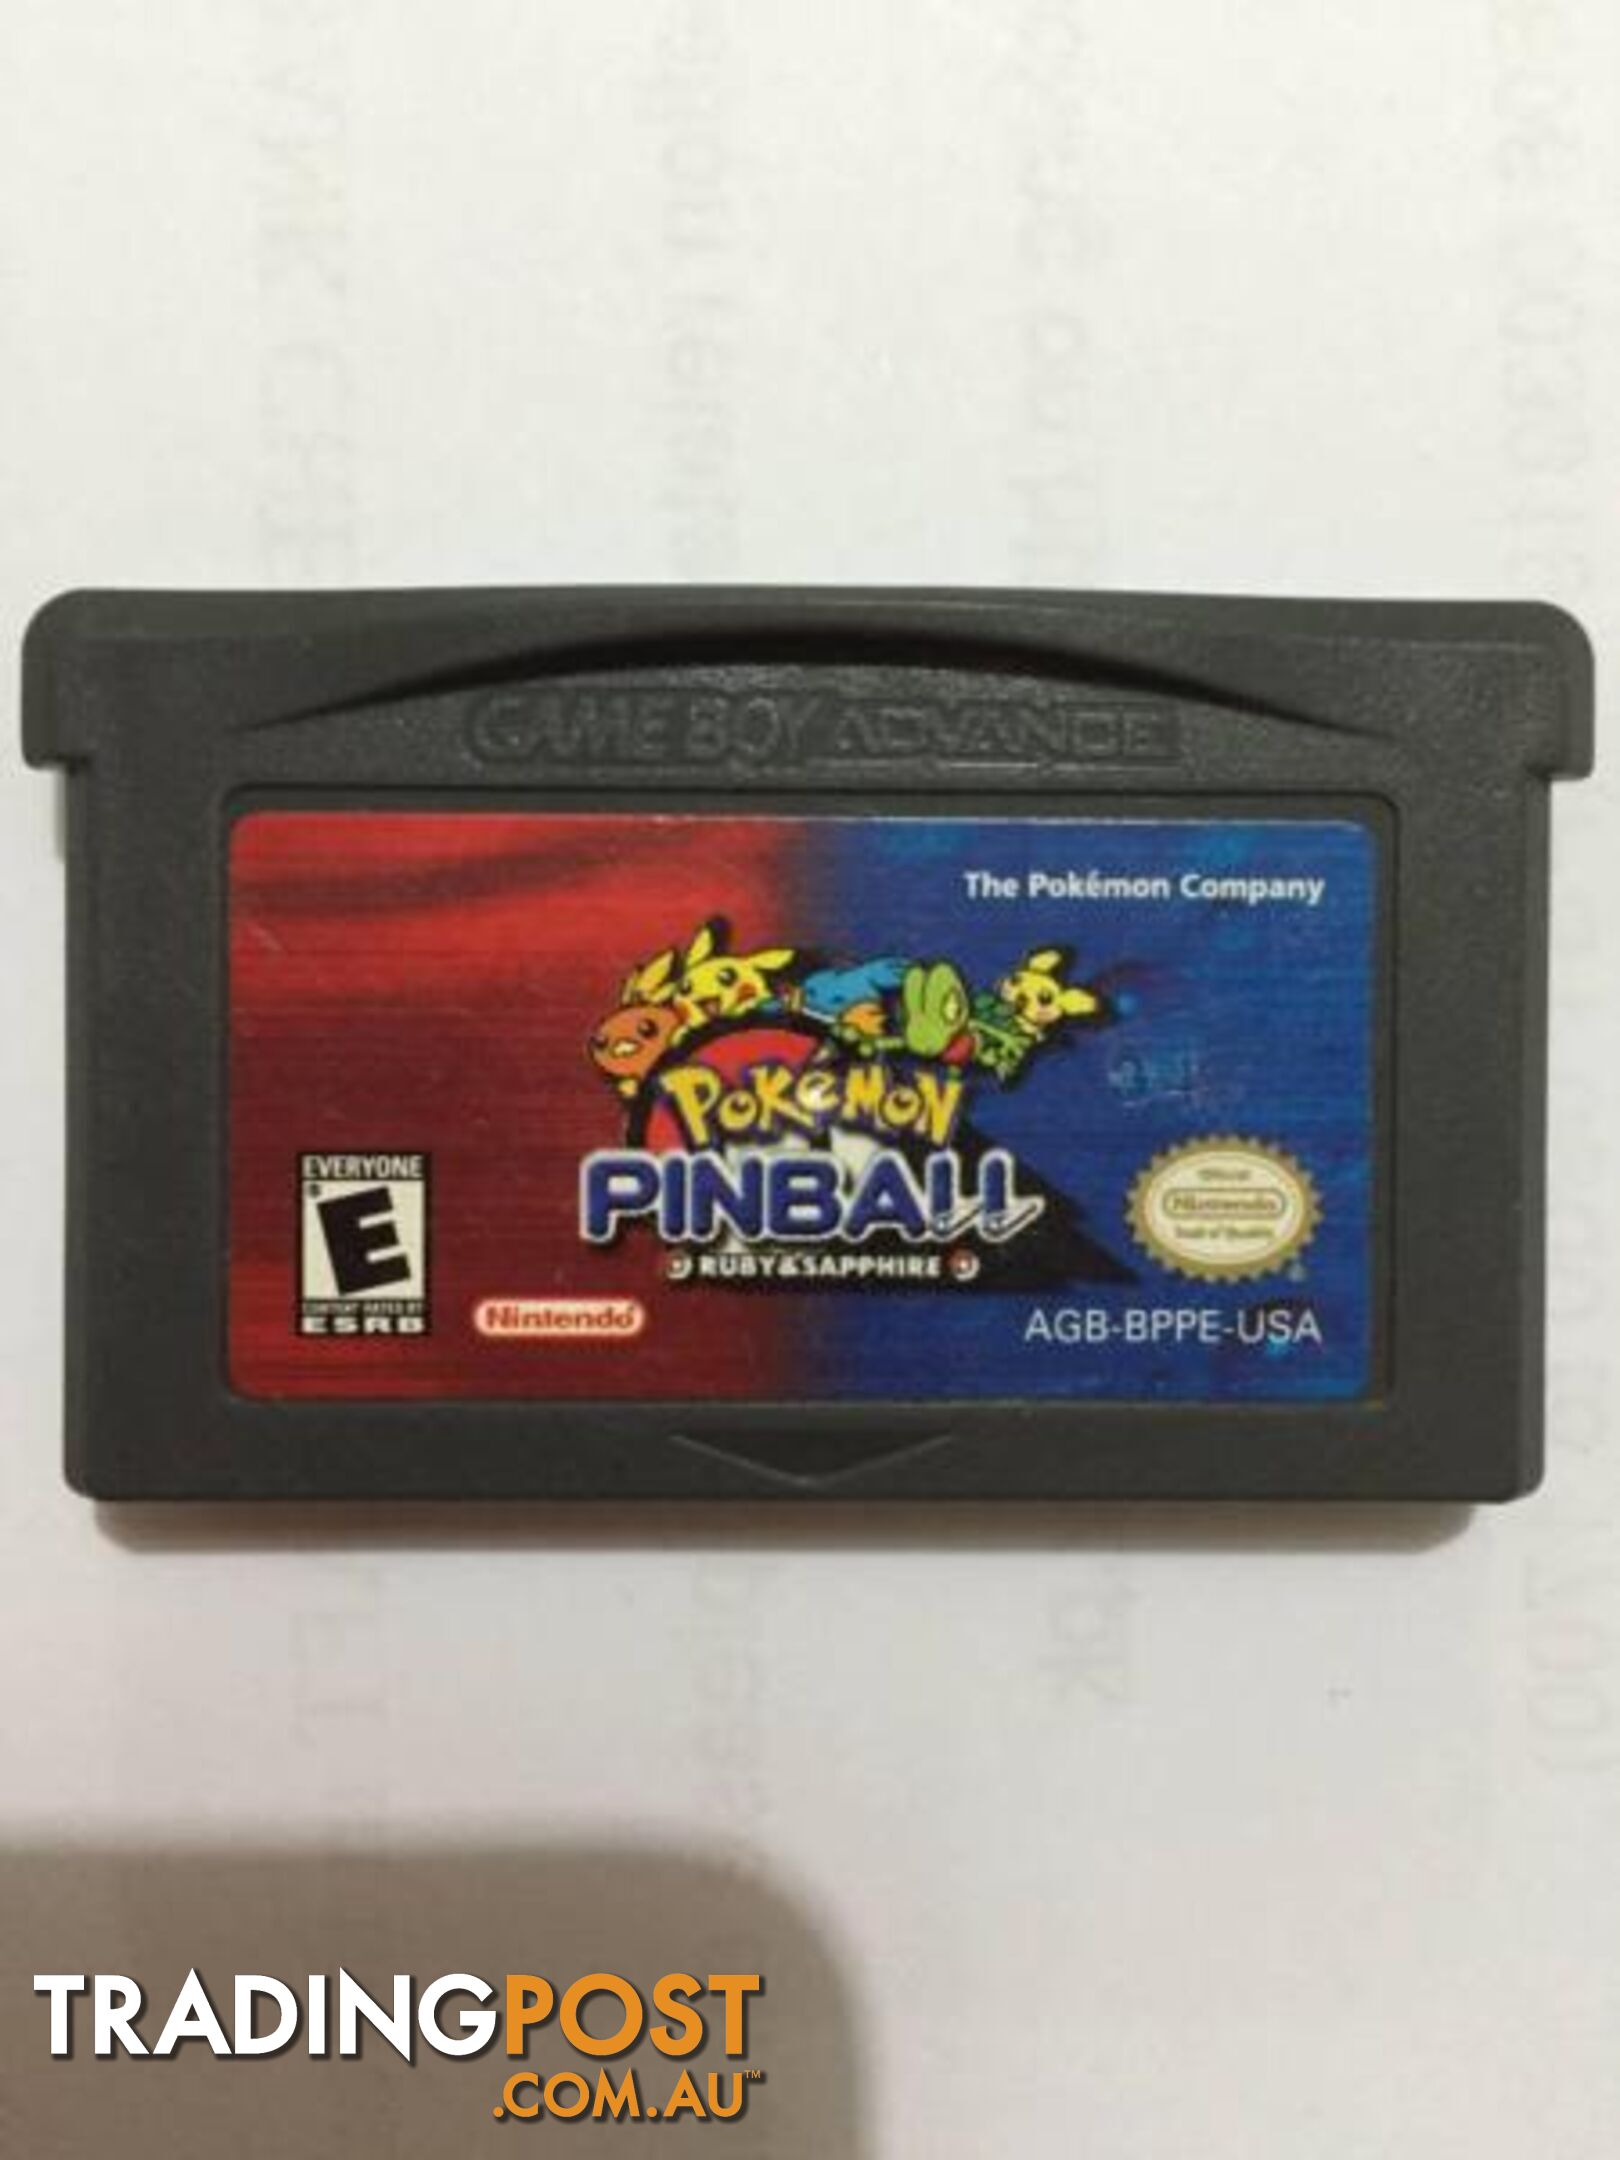 Gameboy and Gameboy Advance Pokemon games